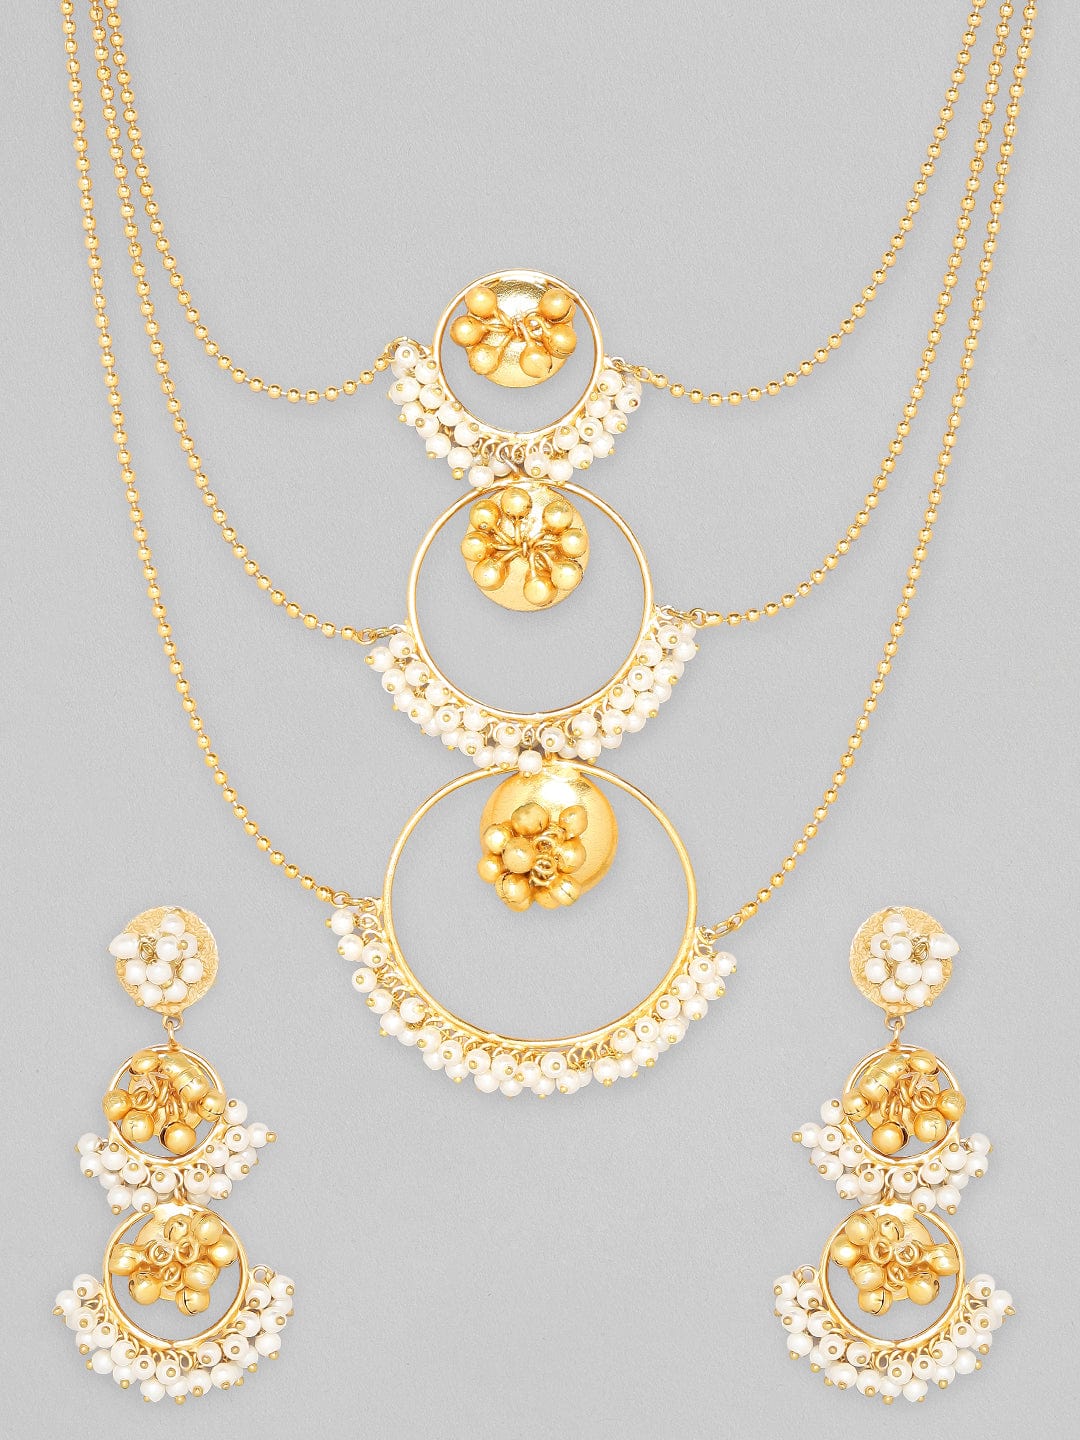 Rubans 24K Gold Plated Handcrafted Layered Necklace Set With Pearls And Floral Design Necklace Set